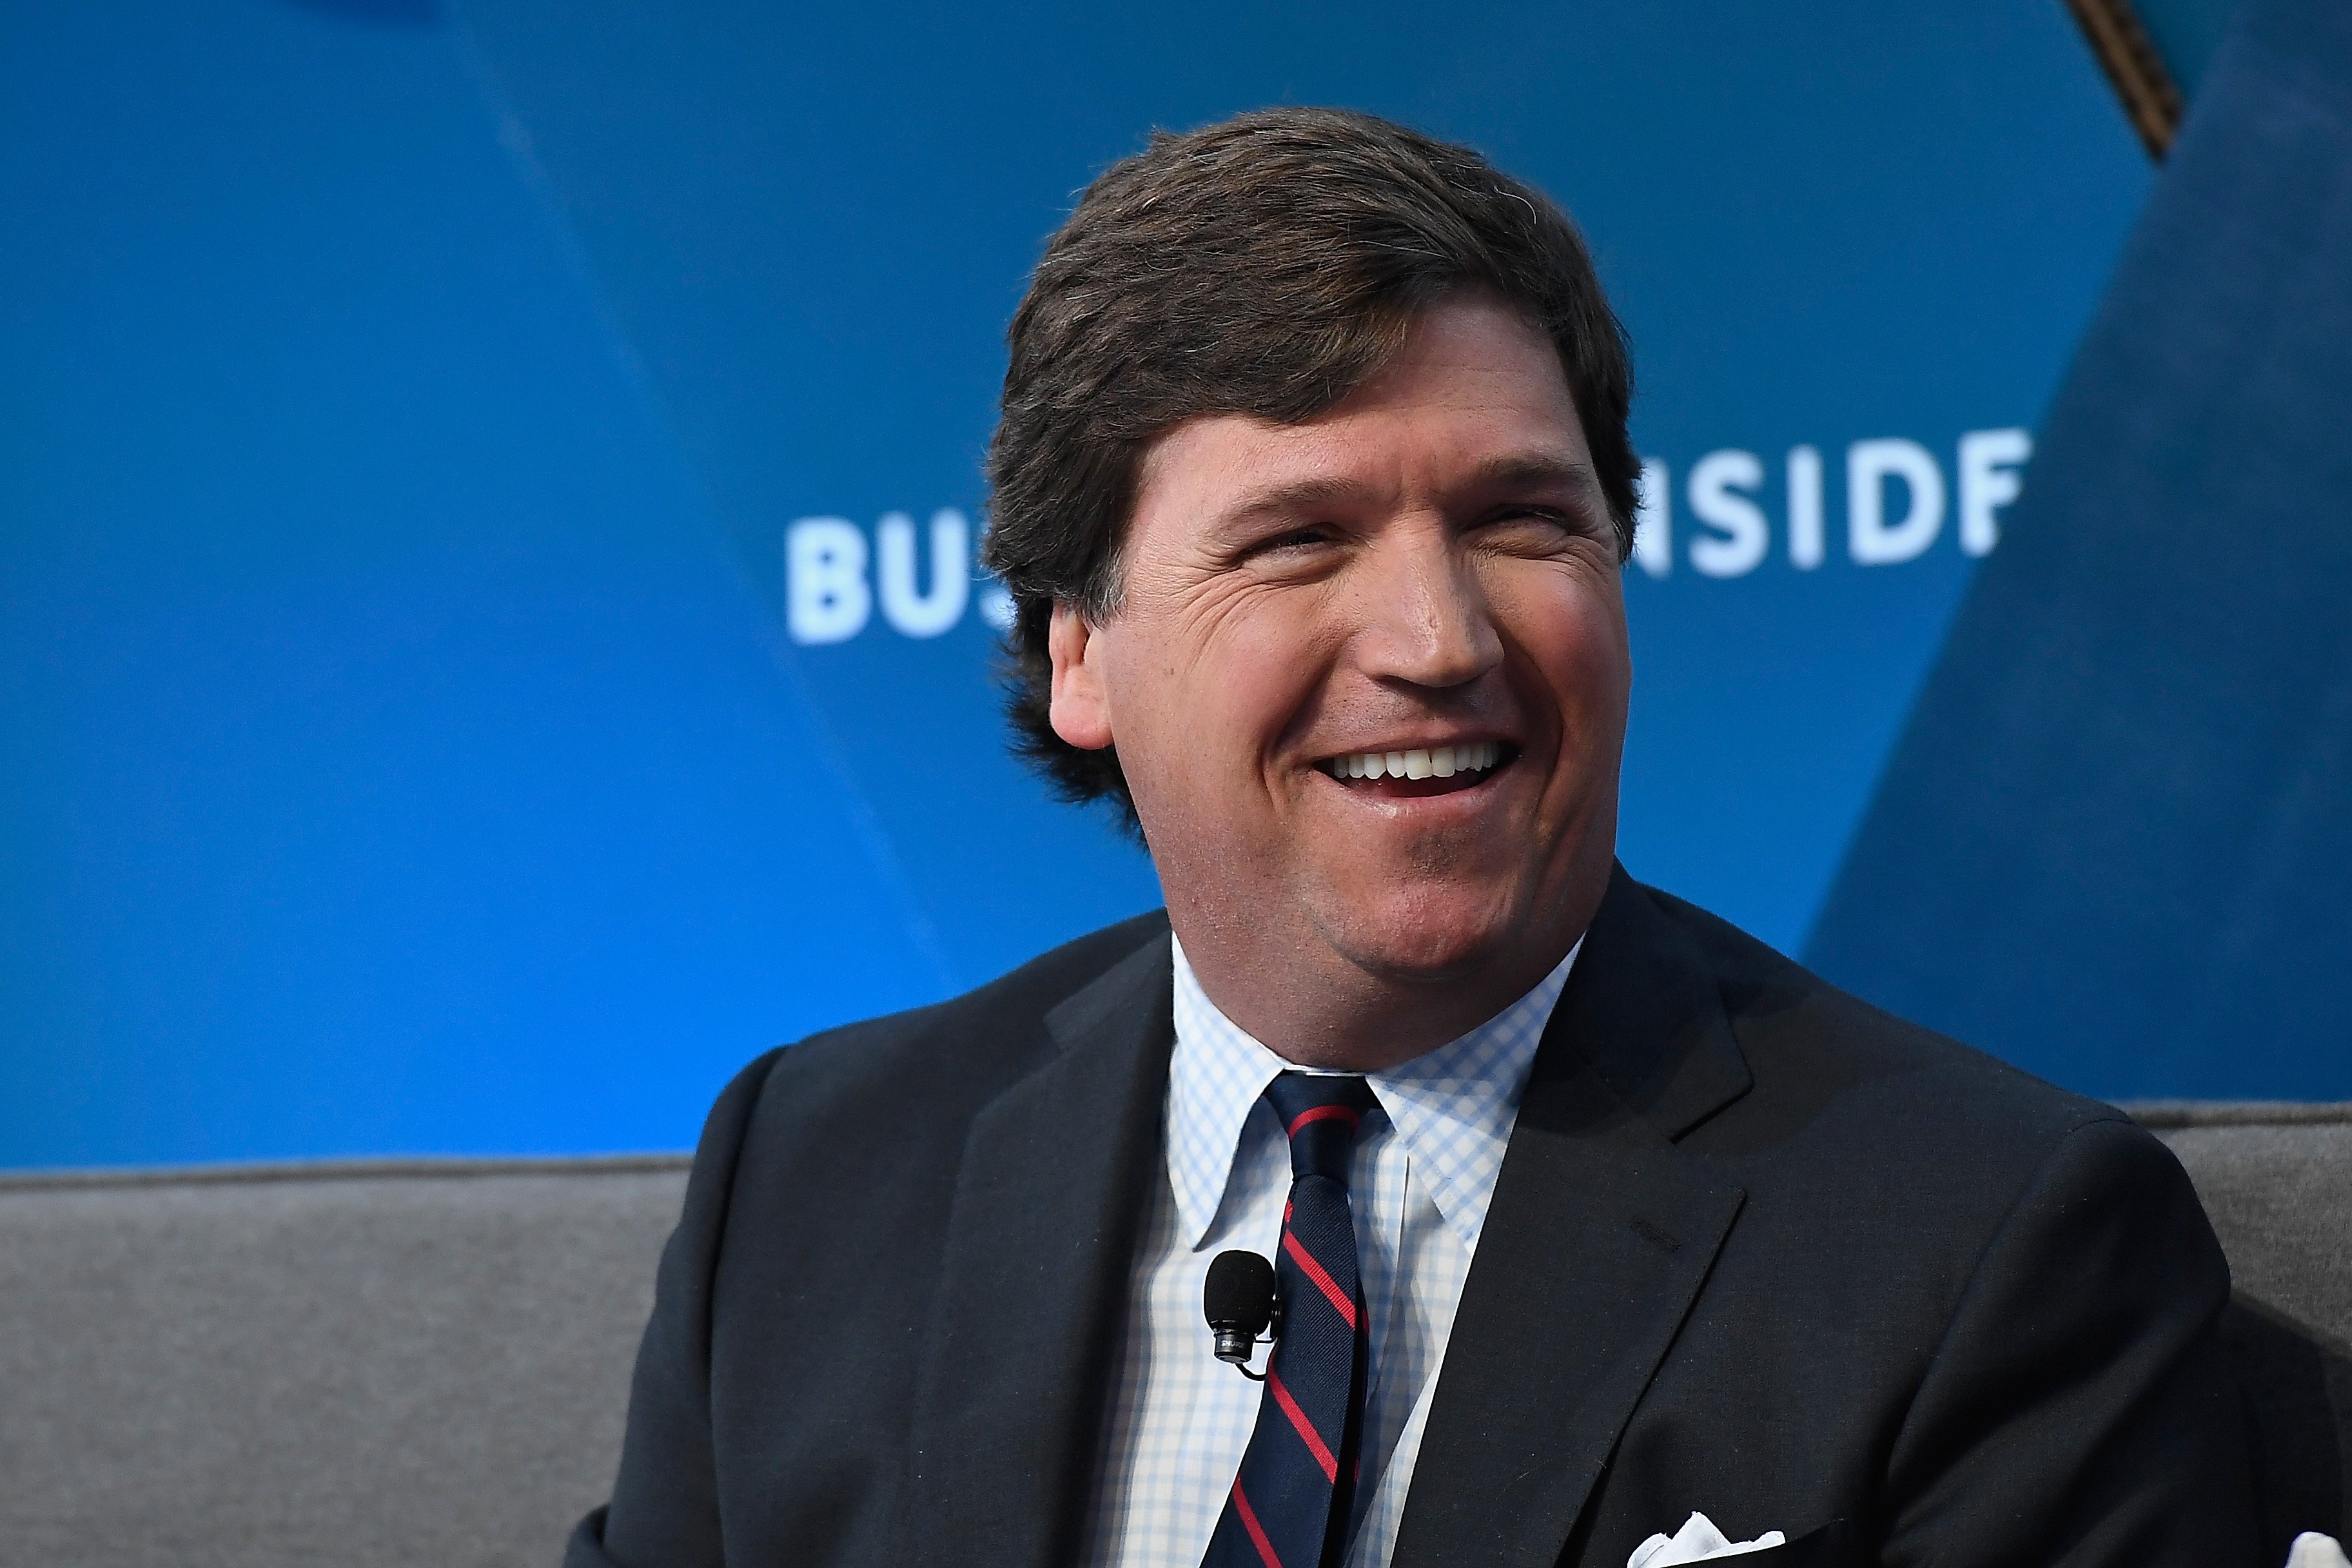 NEW YORK, NY - NOVEMBER 29: Tucker Carlson, host of "Tucker Carlson Tonight" speaks onstage at IGNITION: Future of Media at Time Warner Center on November 29, 2017 in New York City. (Photo by Roy Rochlin/Getty Images)